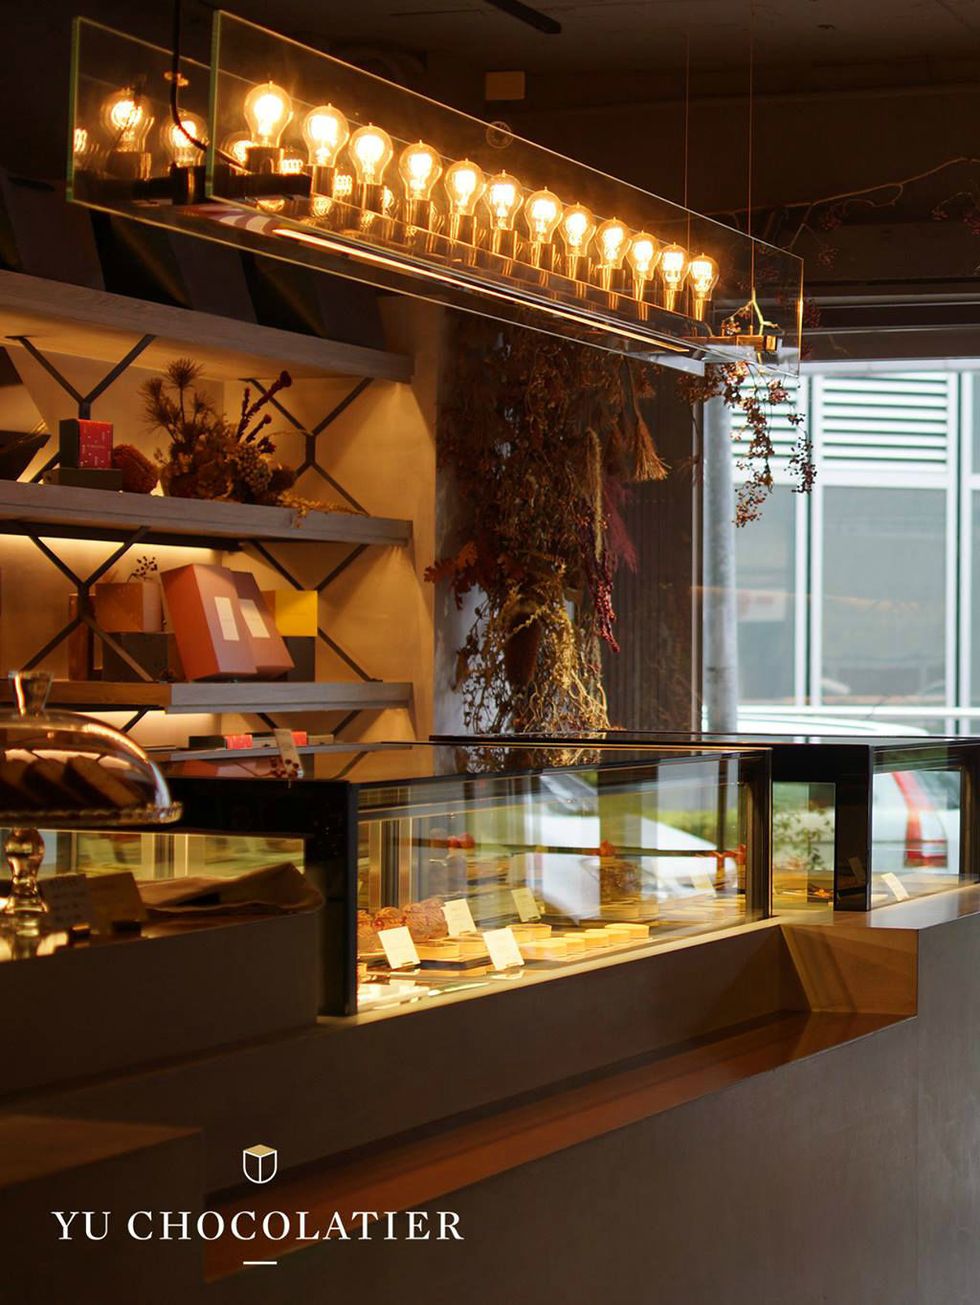 Display case, Lighting, Ceiling, Interior design, Light fixture, Room, Building, Architecture, Glass, Tourist attraction, 